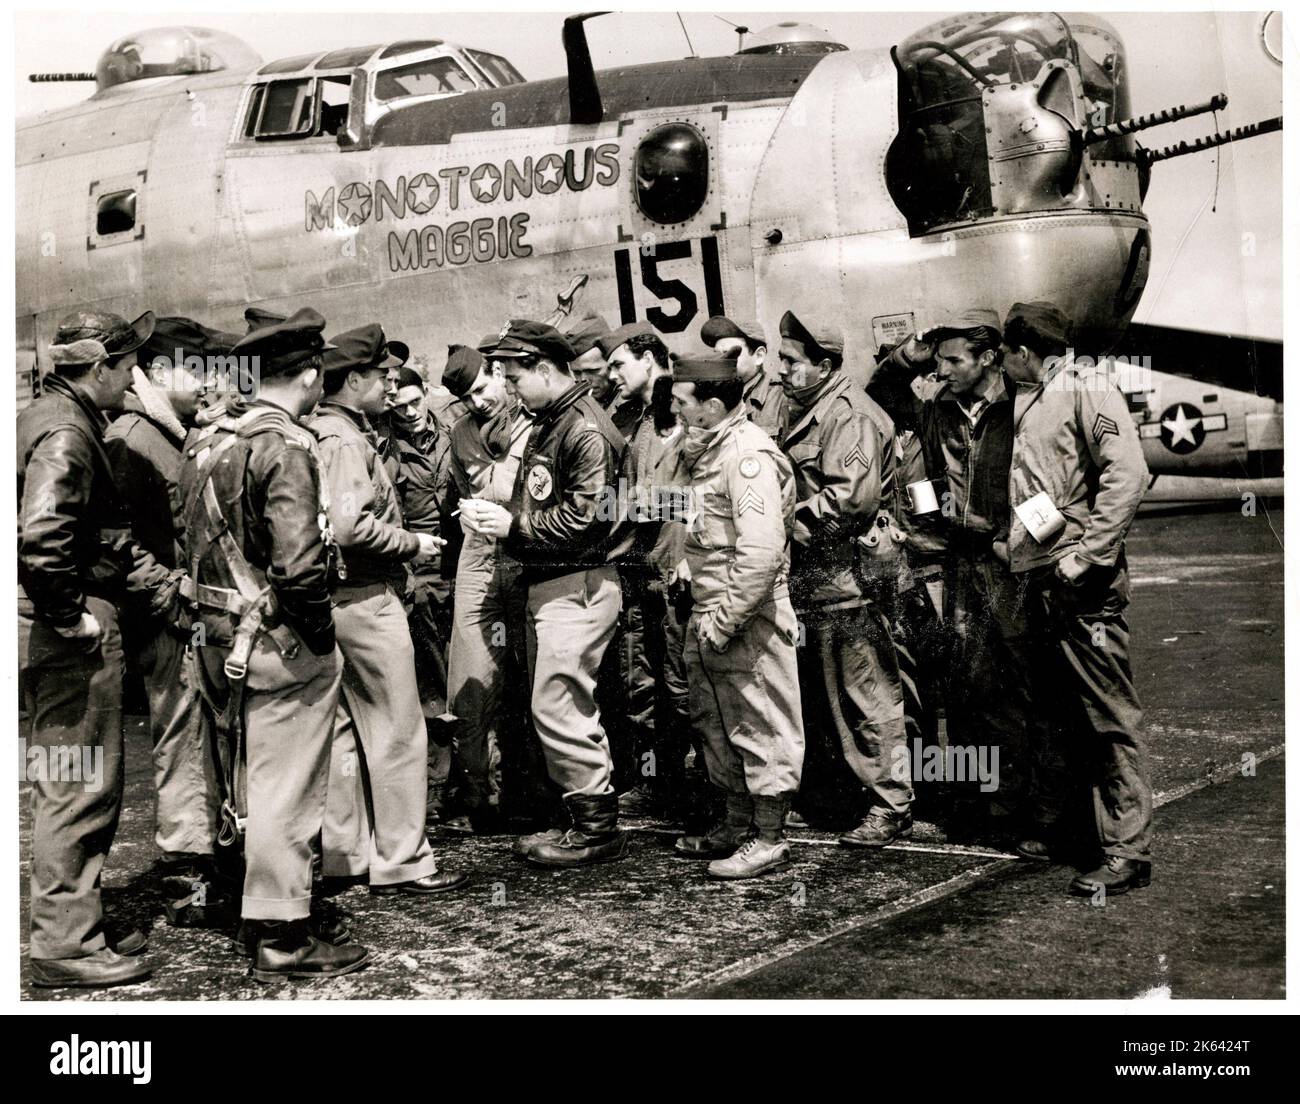 World War II -  US Airforce crew prepare for return to USA following end of war in Europe and possible redeployment in Japan. Bomber named Monotonous Maggie Stock Photo